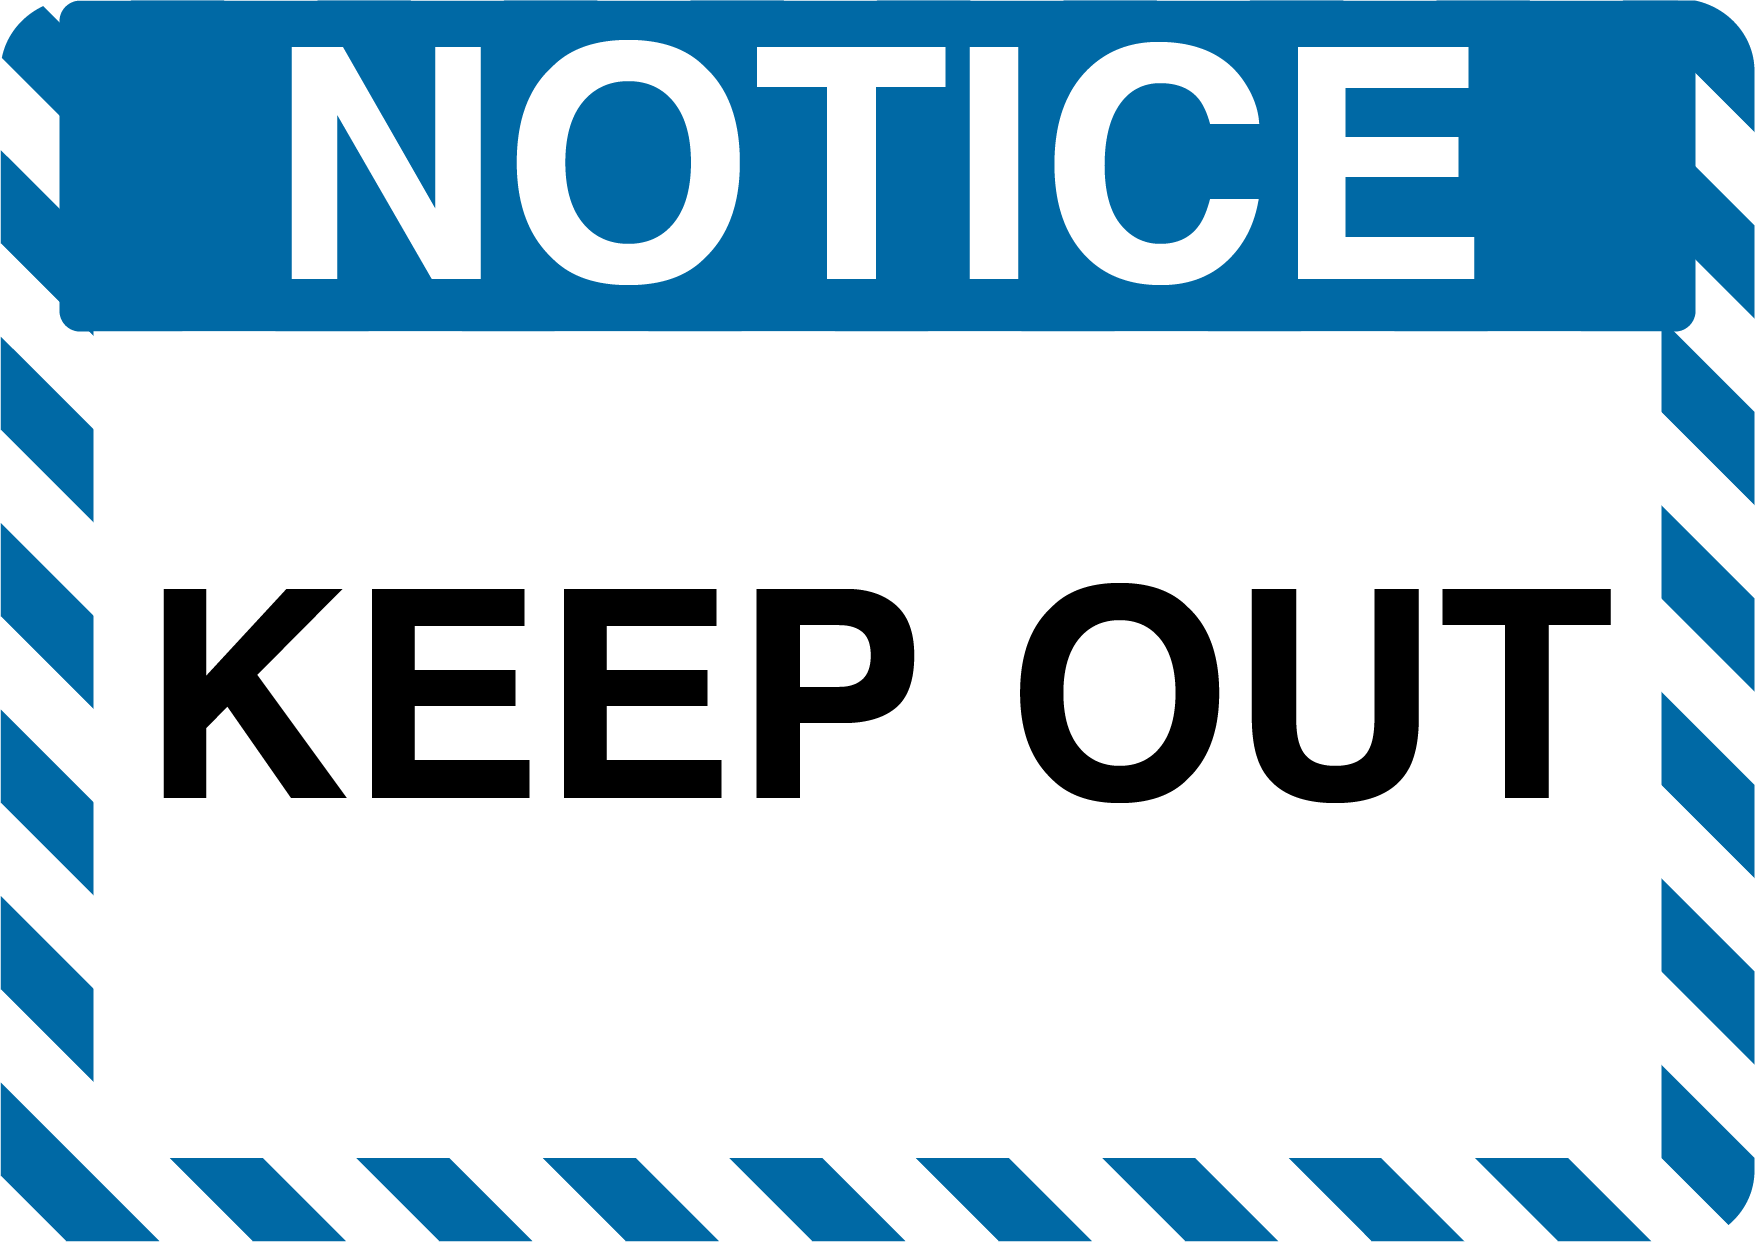 Notice "Keep Out" Durable Matte Laminated Vinyl Floor Sign- Various Sizes Available